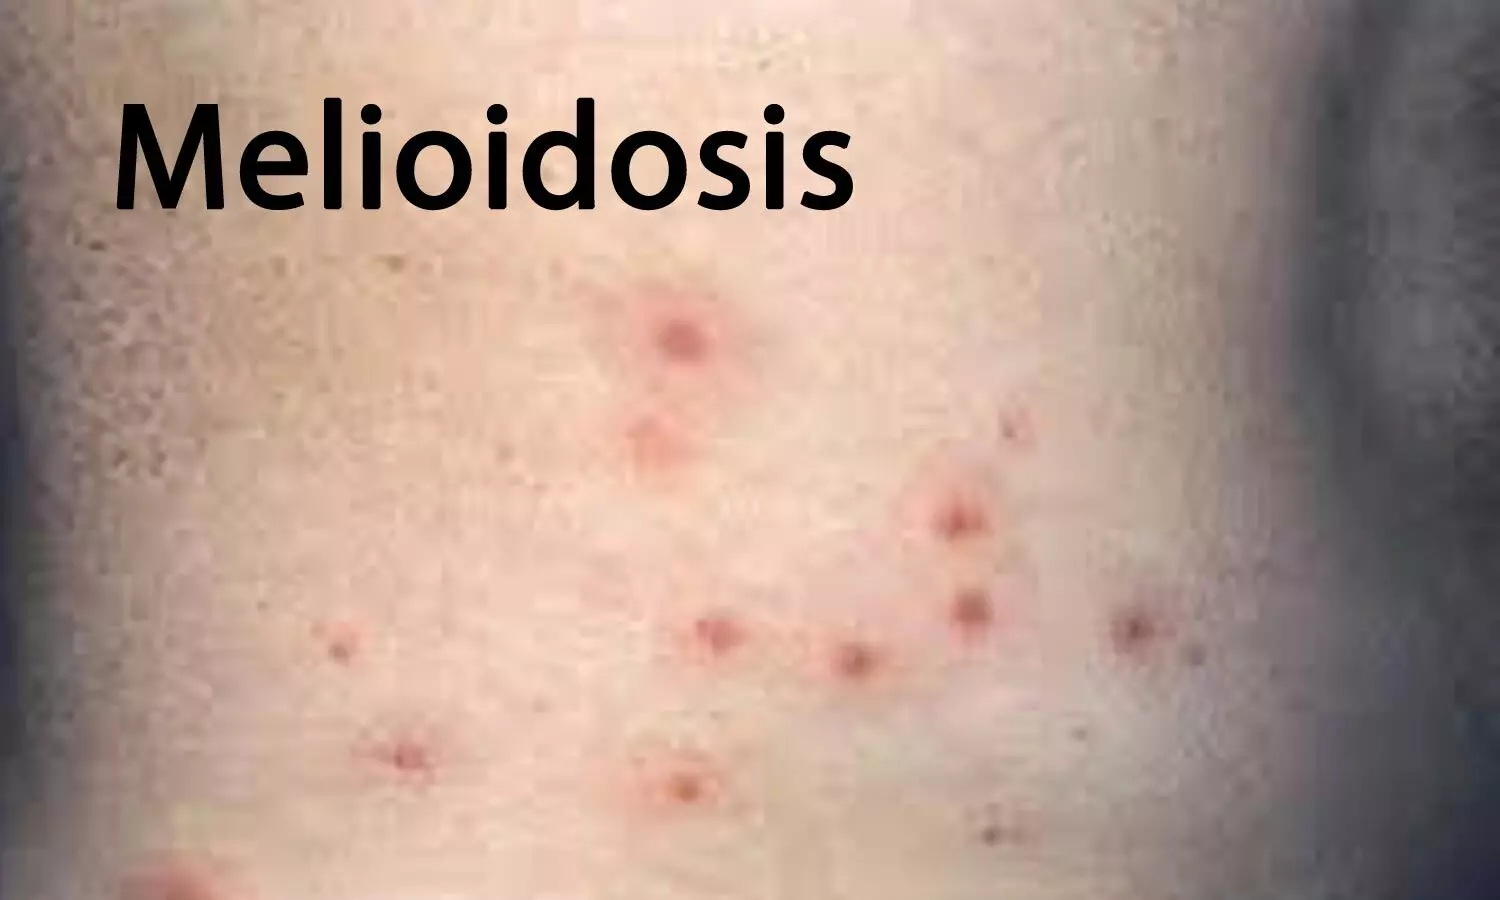 Case of Meliodosis reported in immunocompetent healthy adult in Sri Lanka